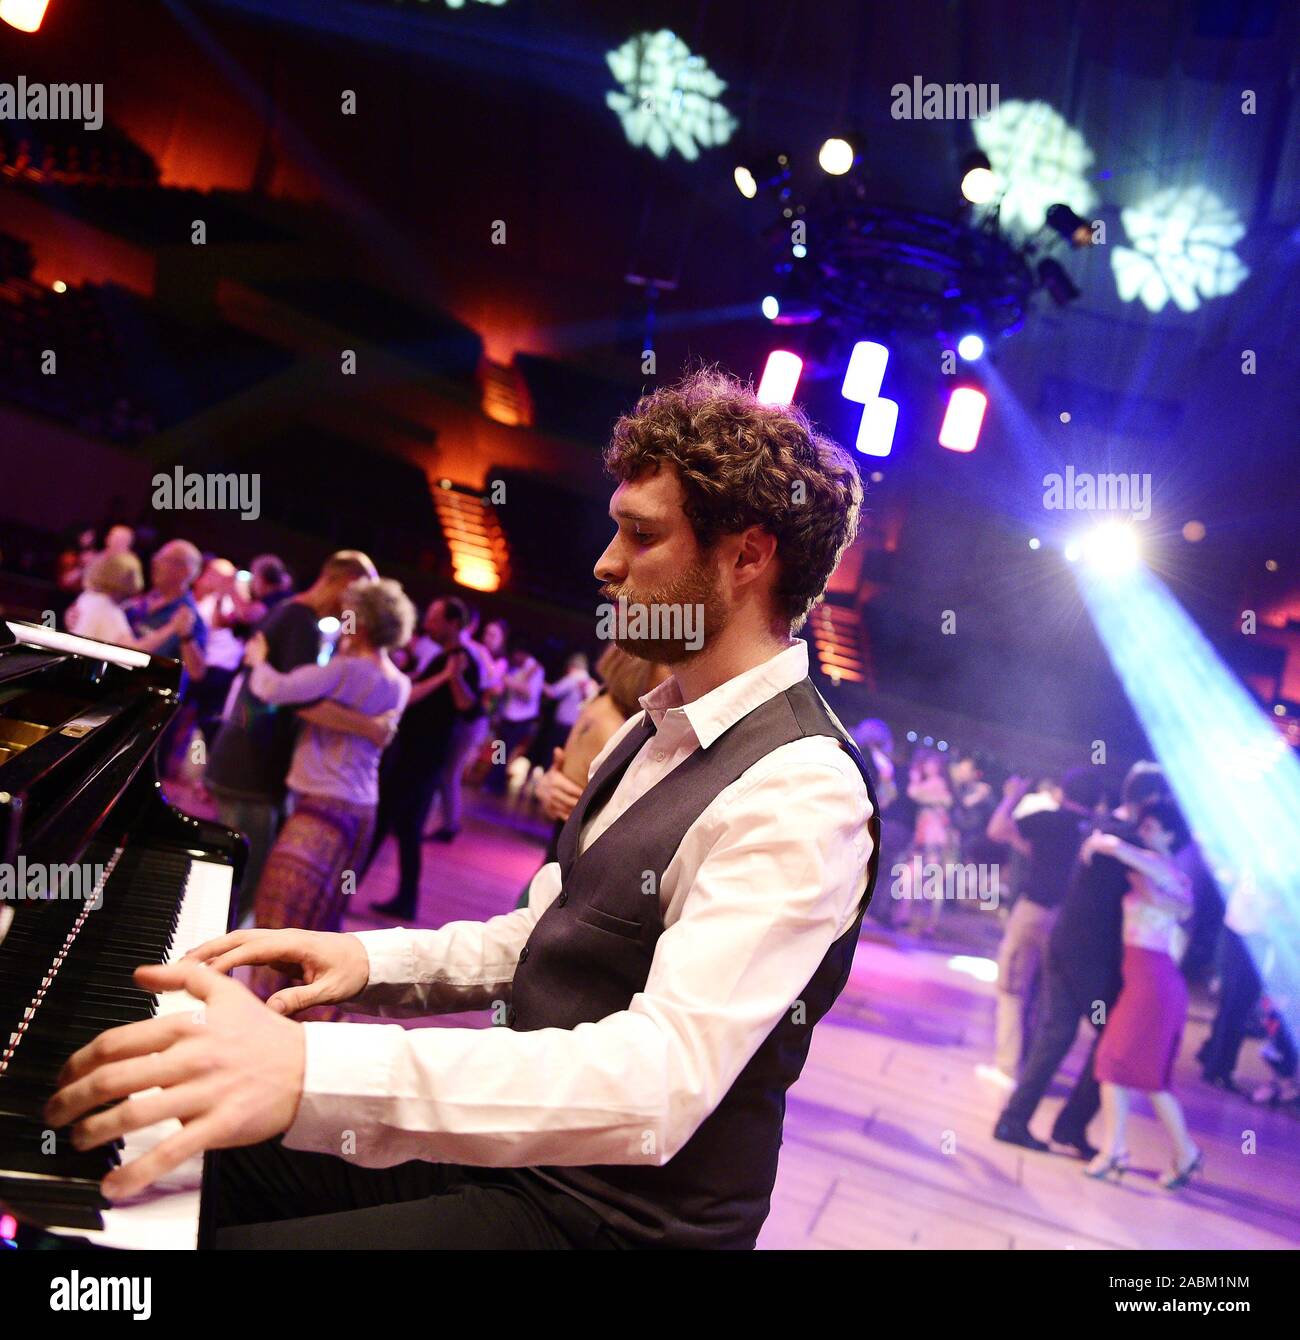 A piano player during his performance at the Gasteig during the event 'Tanz den Gasteig'. [automated translation] Stock Photo